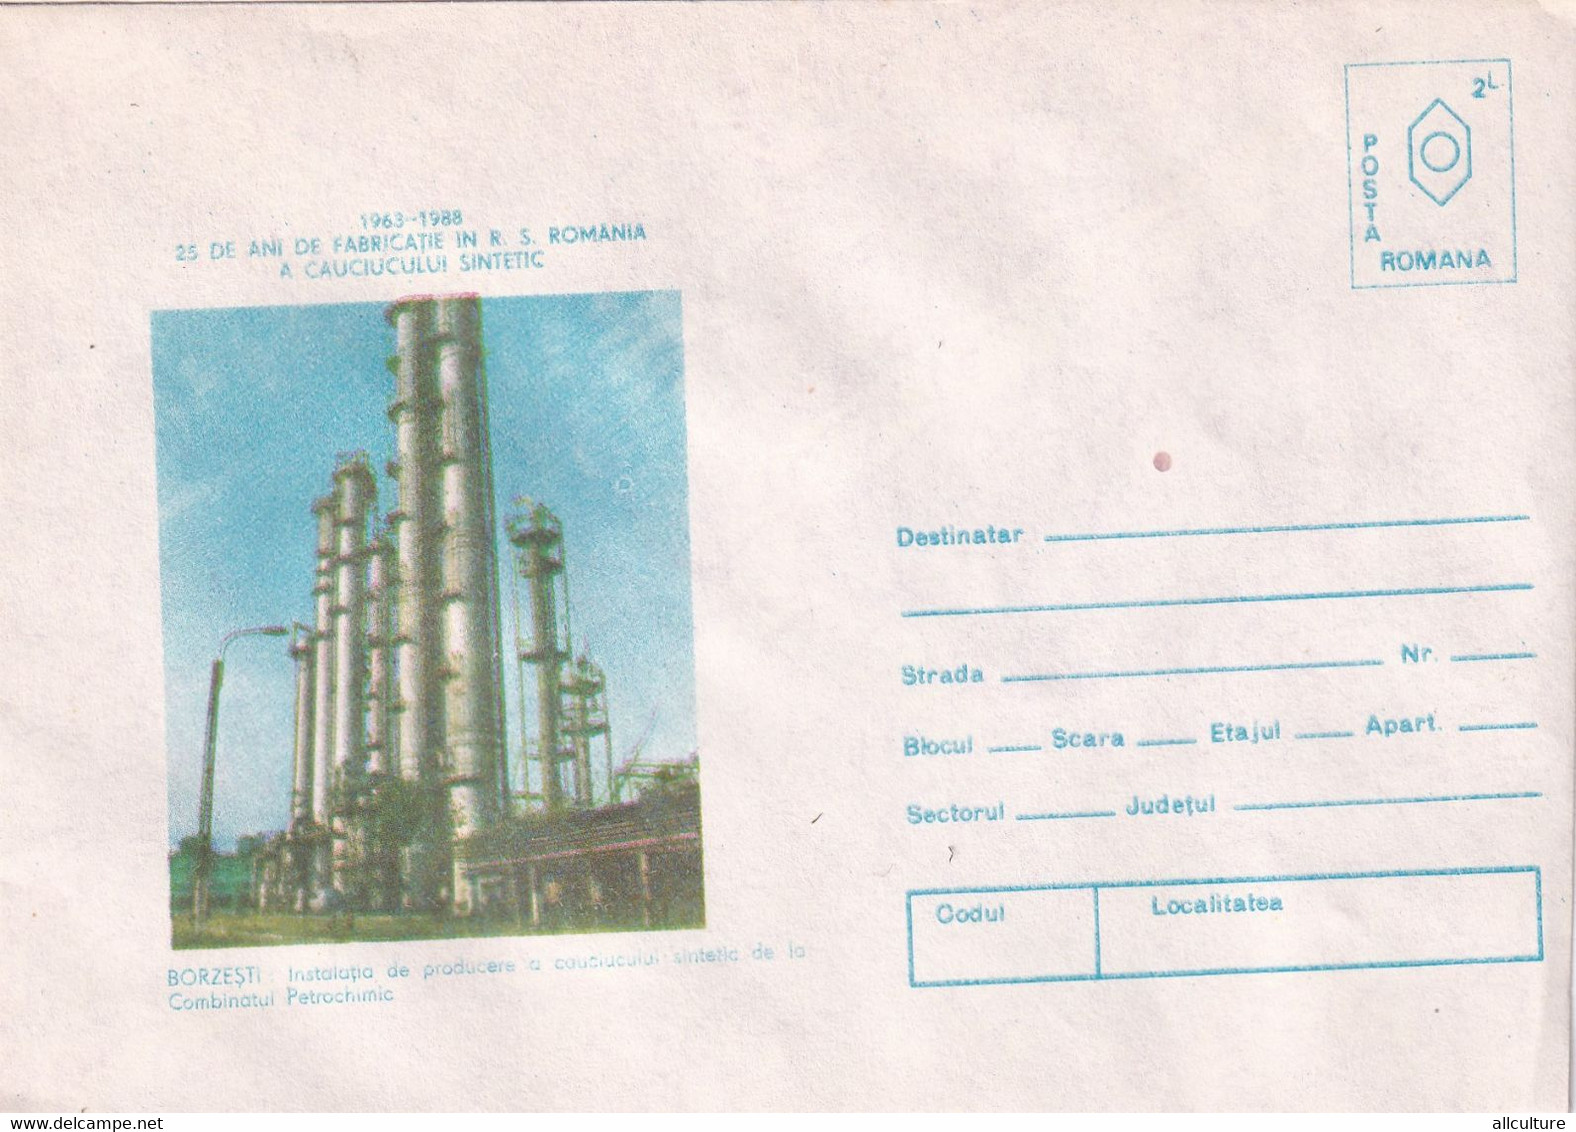 A3119 - 25 Years Of Manufacturing Synthetic Rubber, Petrochemical Plant 1963-1988, Borzesti  Romania Cover Stationery - Chemistry